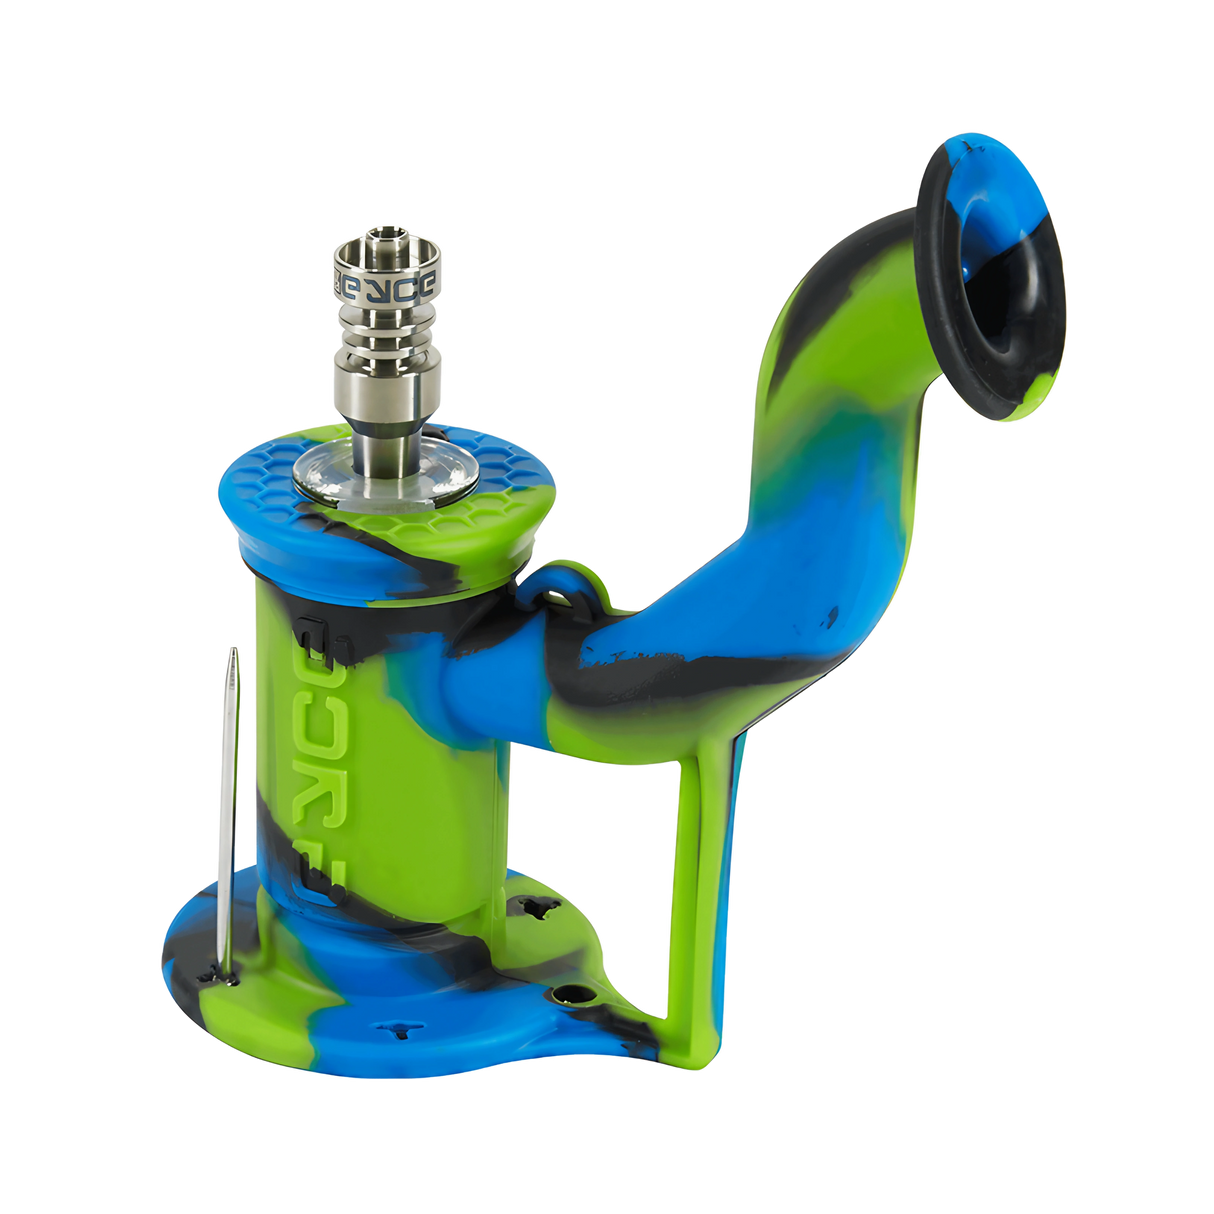 EYCE Rig 2.0 Silicone Dab Rig in Estonia Green/Blue with Titanium Nail - Angled Side View